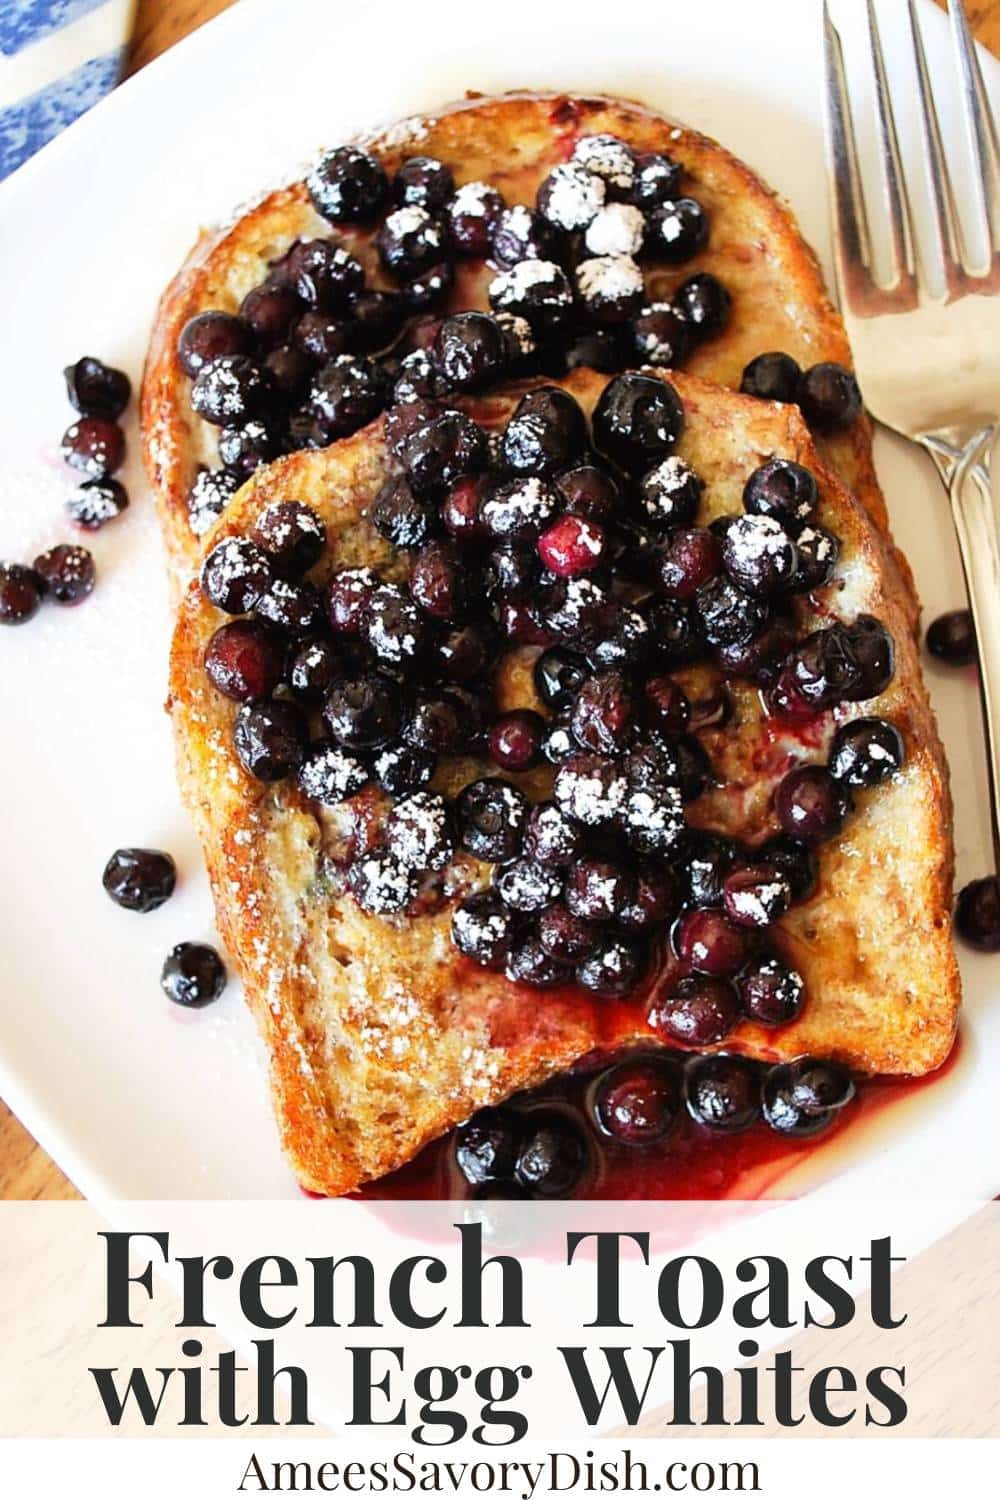 A nutritious and easy recipe for high protein French Toast made with egg whites for the perfect muscle-building breakfast. via @Ameessavorydish